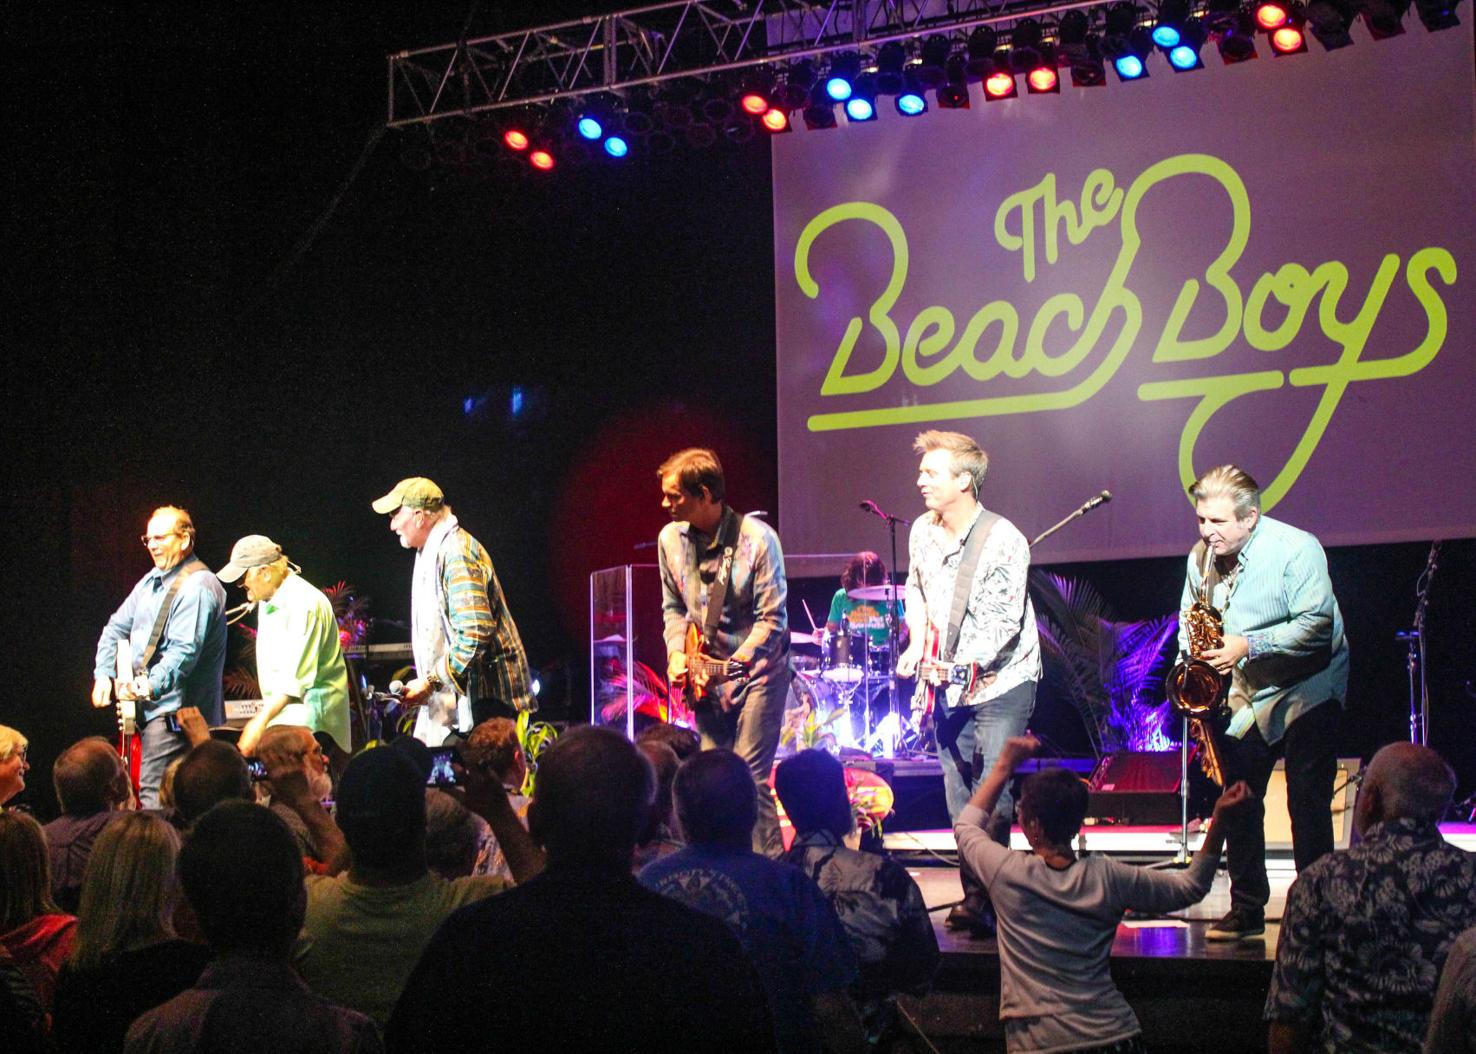 Beach Boys perform 40 song setlist to soldout crowd at Lied Center